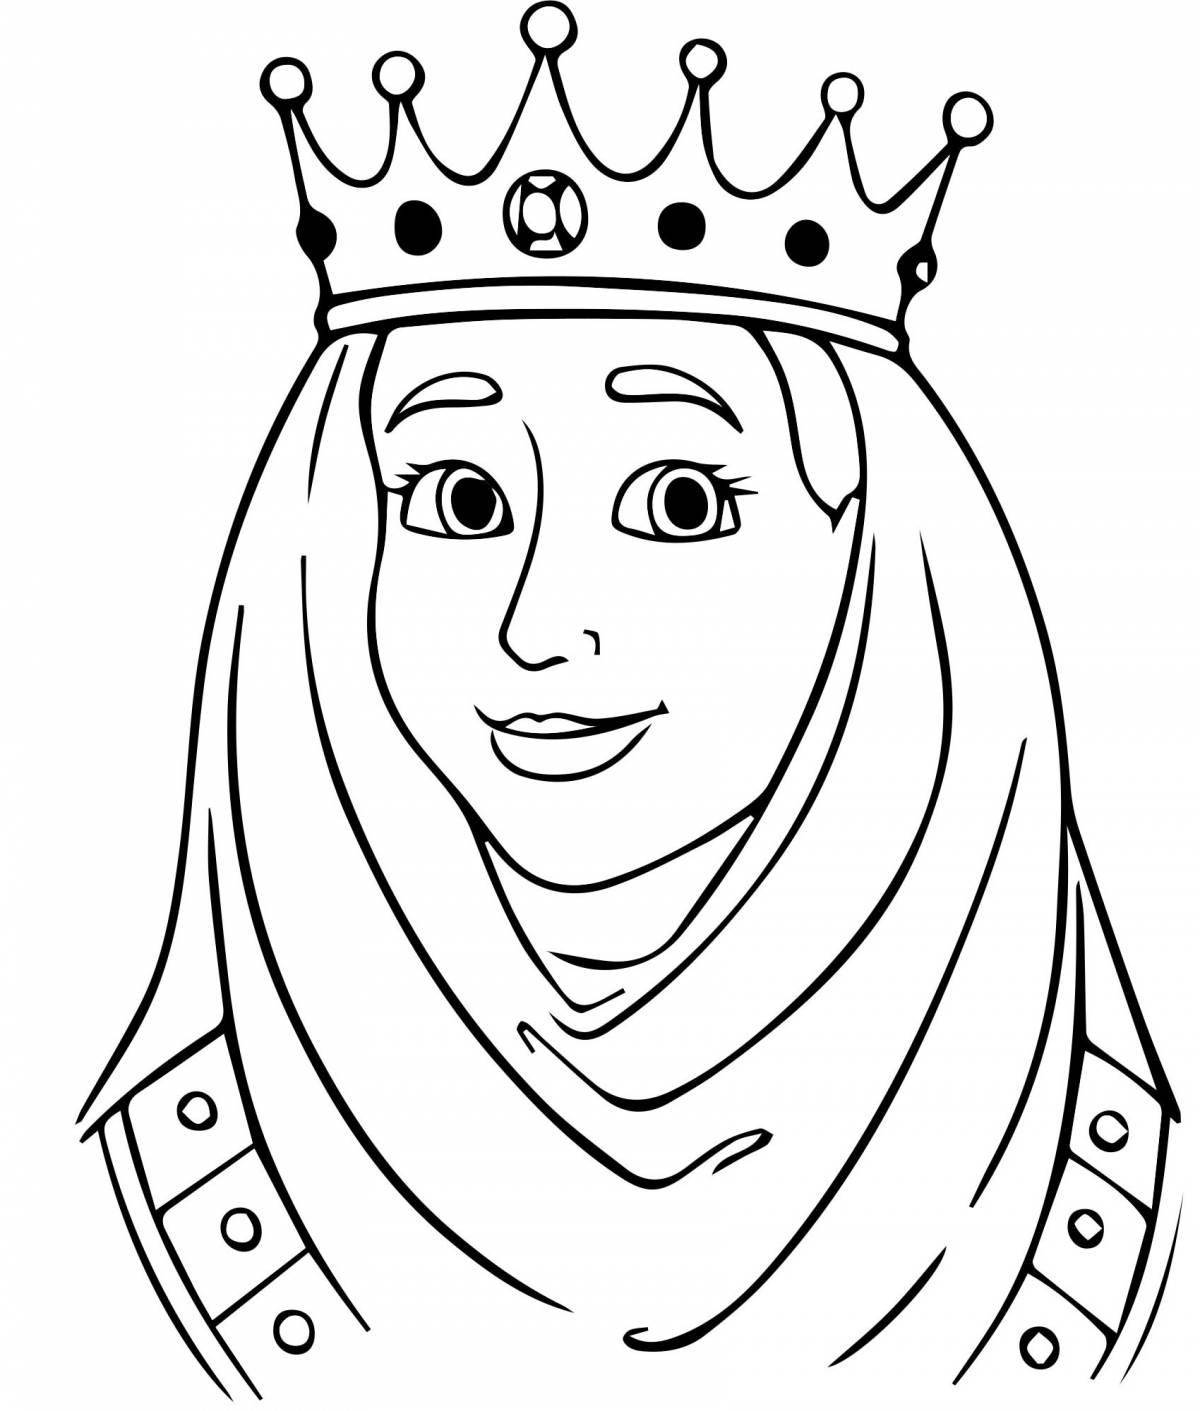 Bright queen coloring book for kids